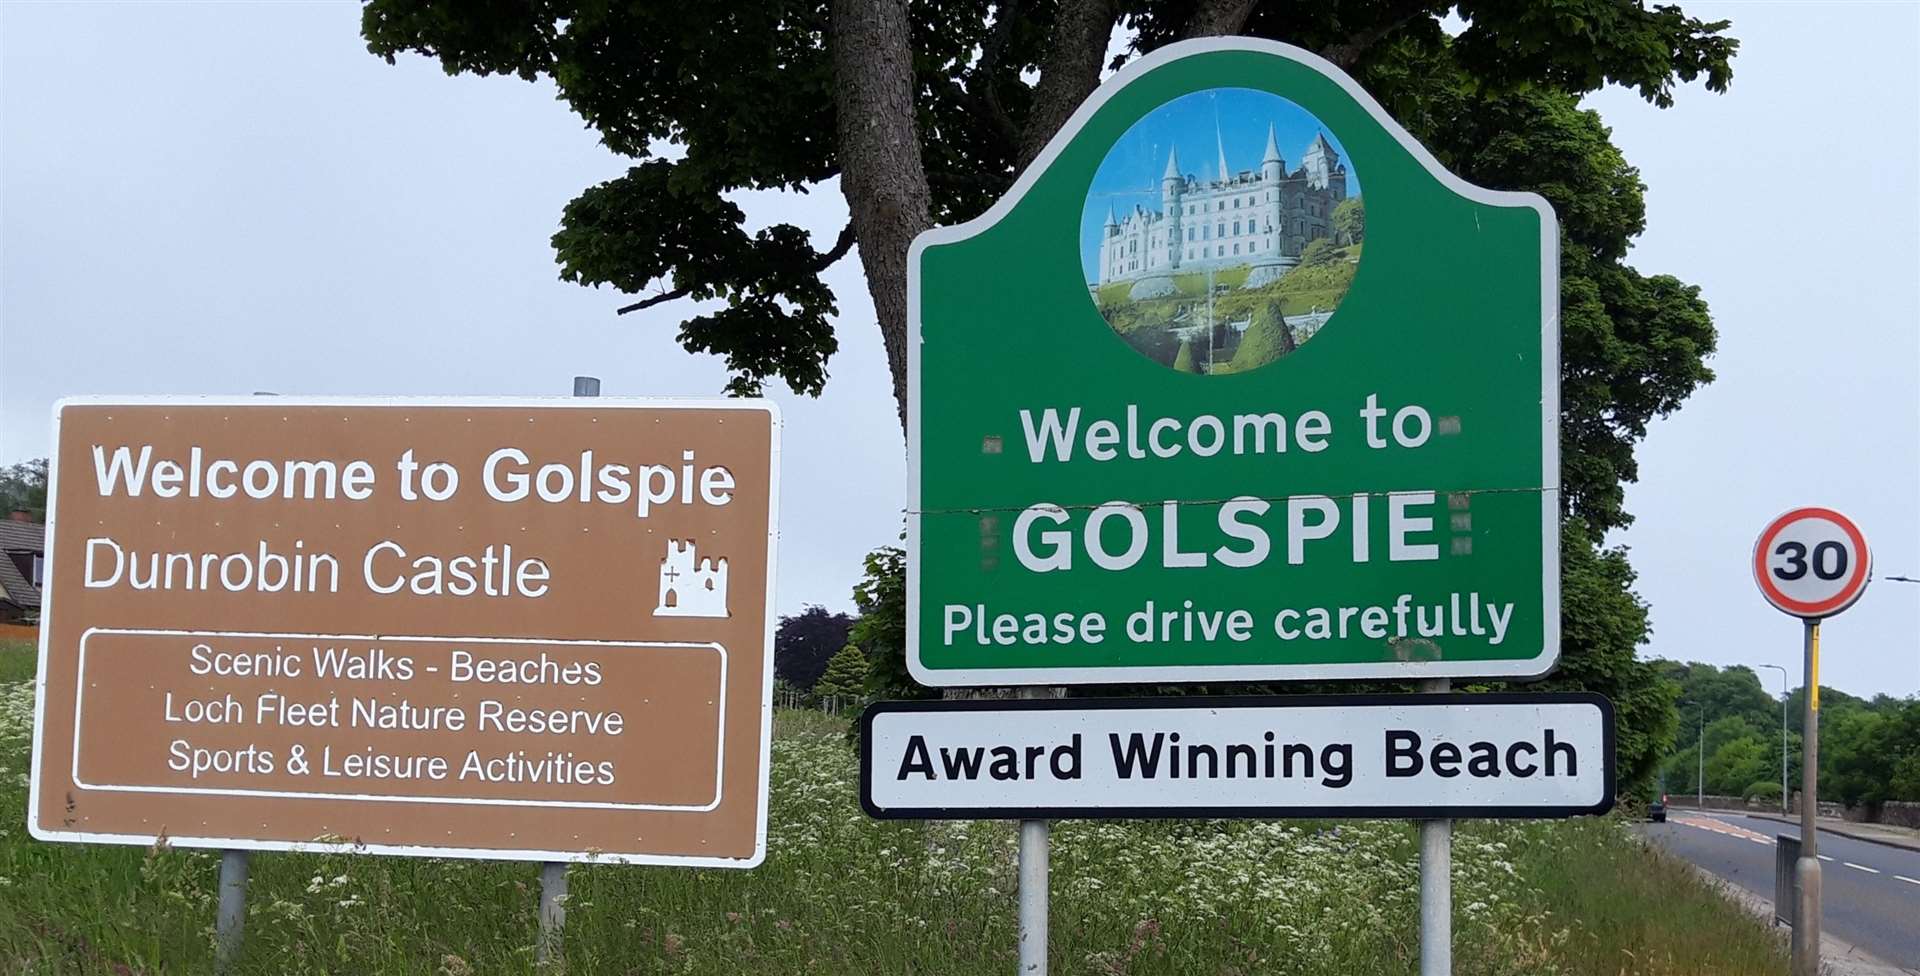 Golspie is to make a community registration to welcome Ukrainian refugees.